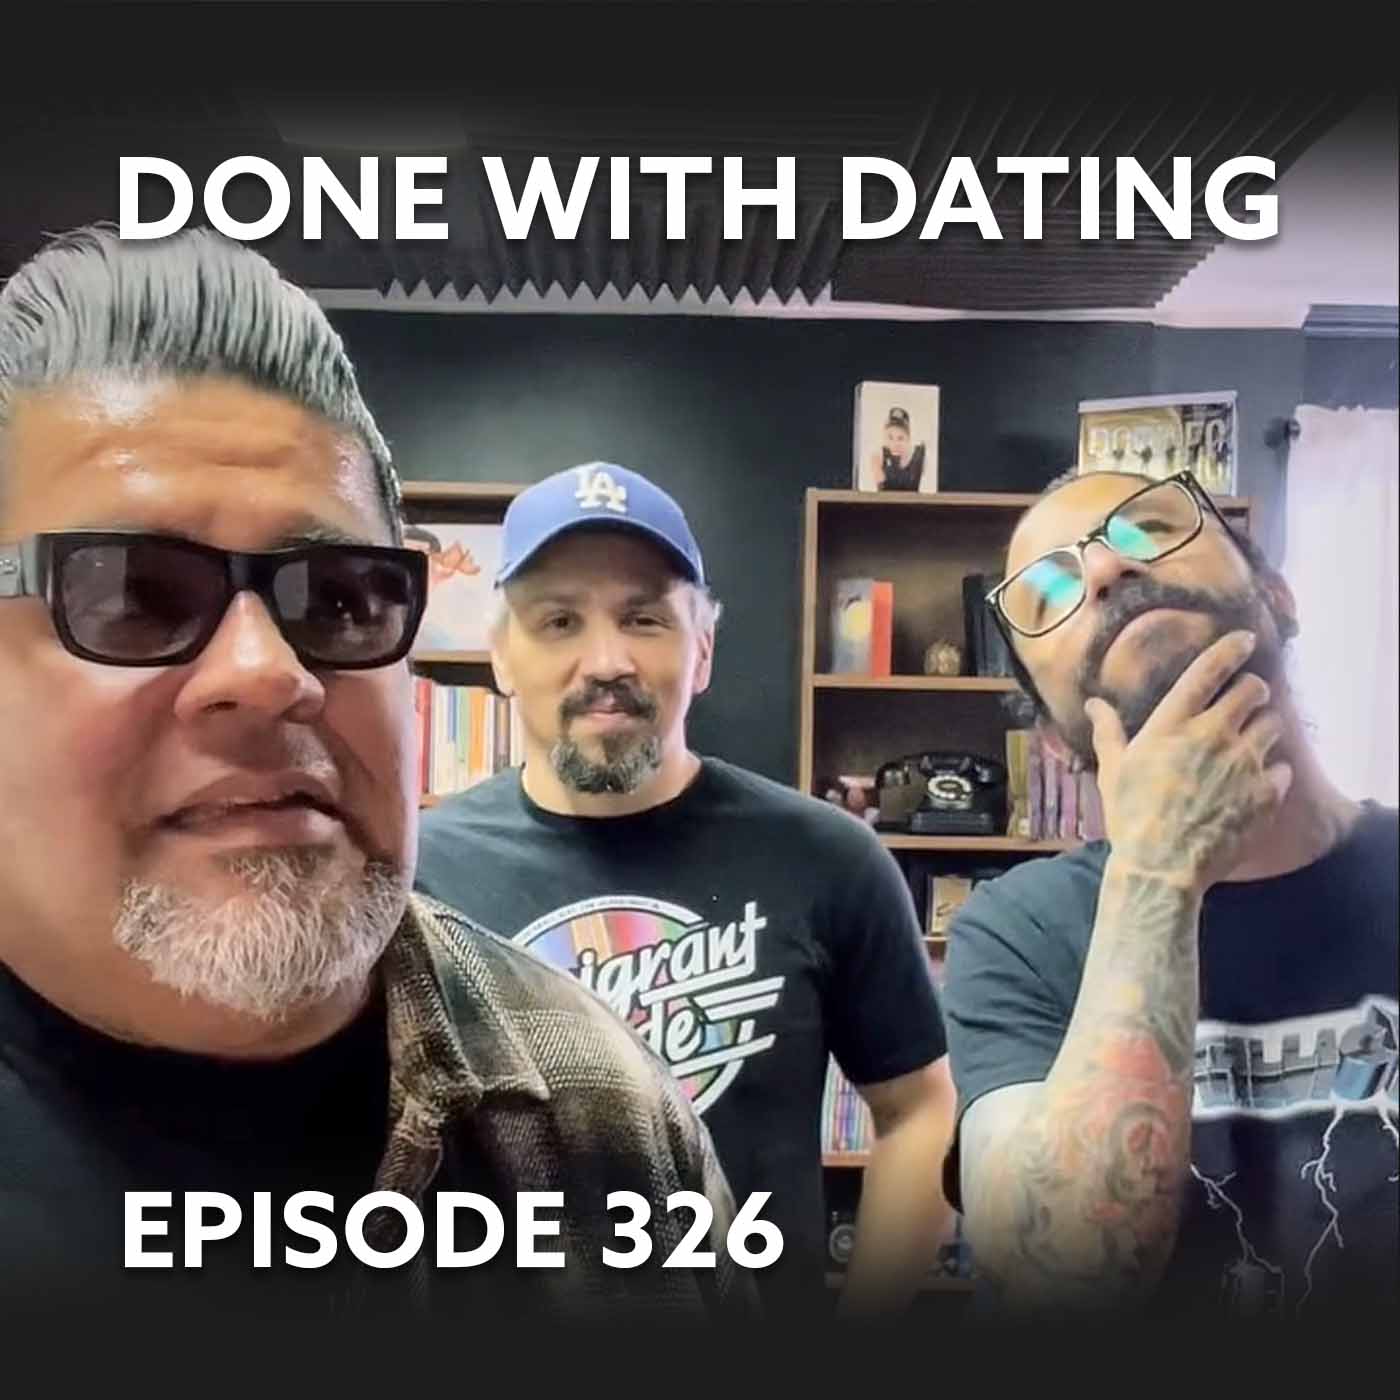 Episode 326 – Done with Dating